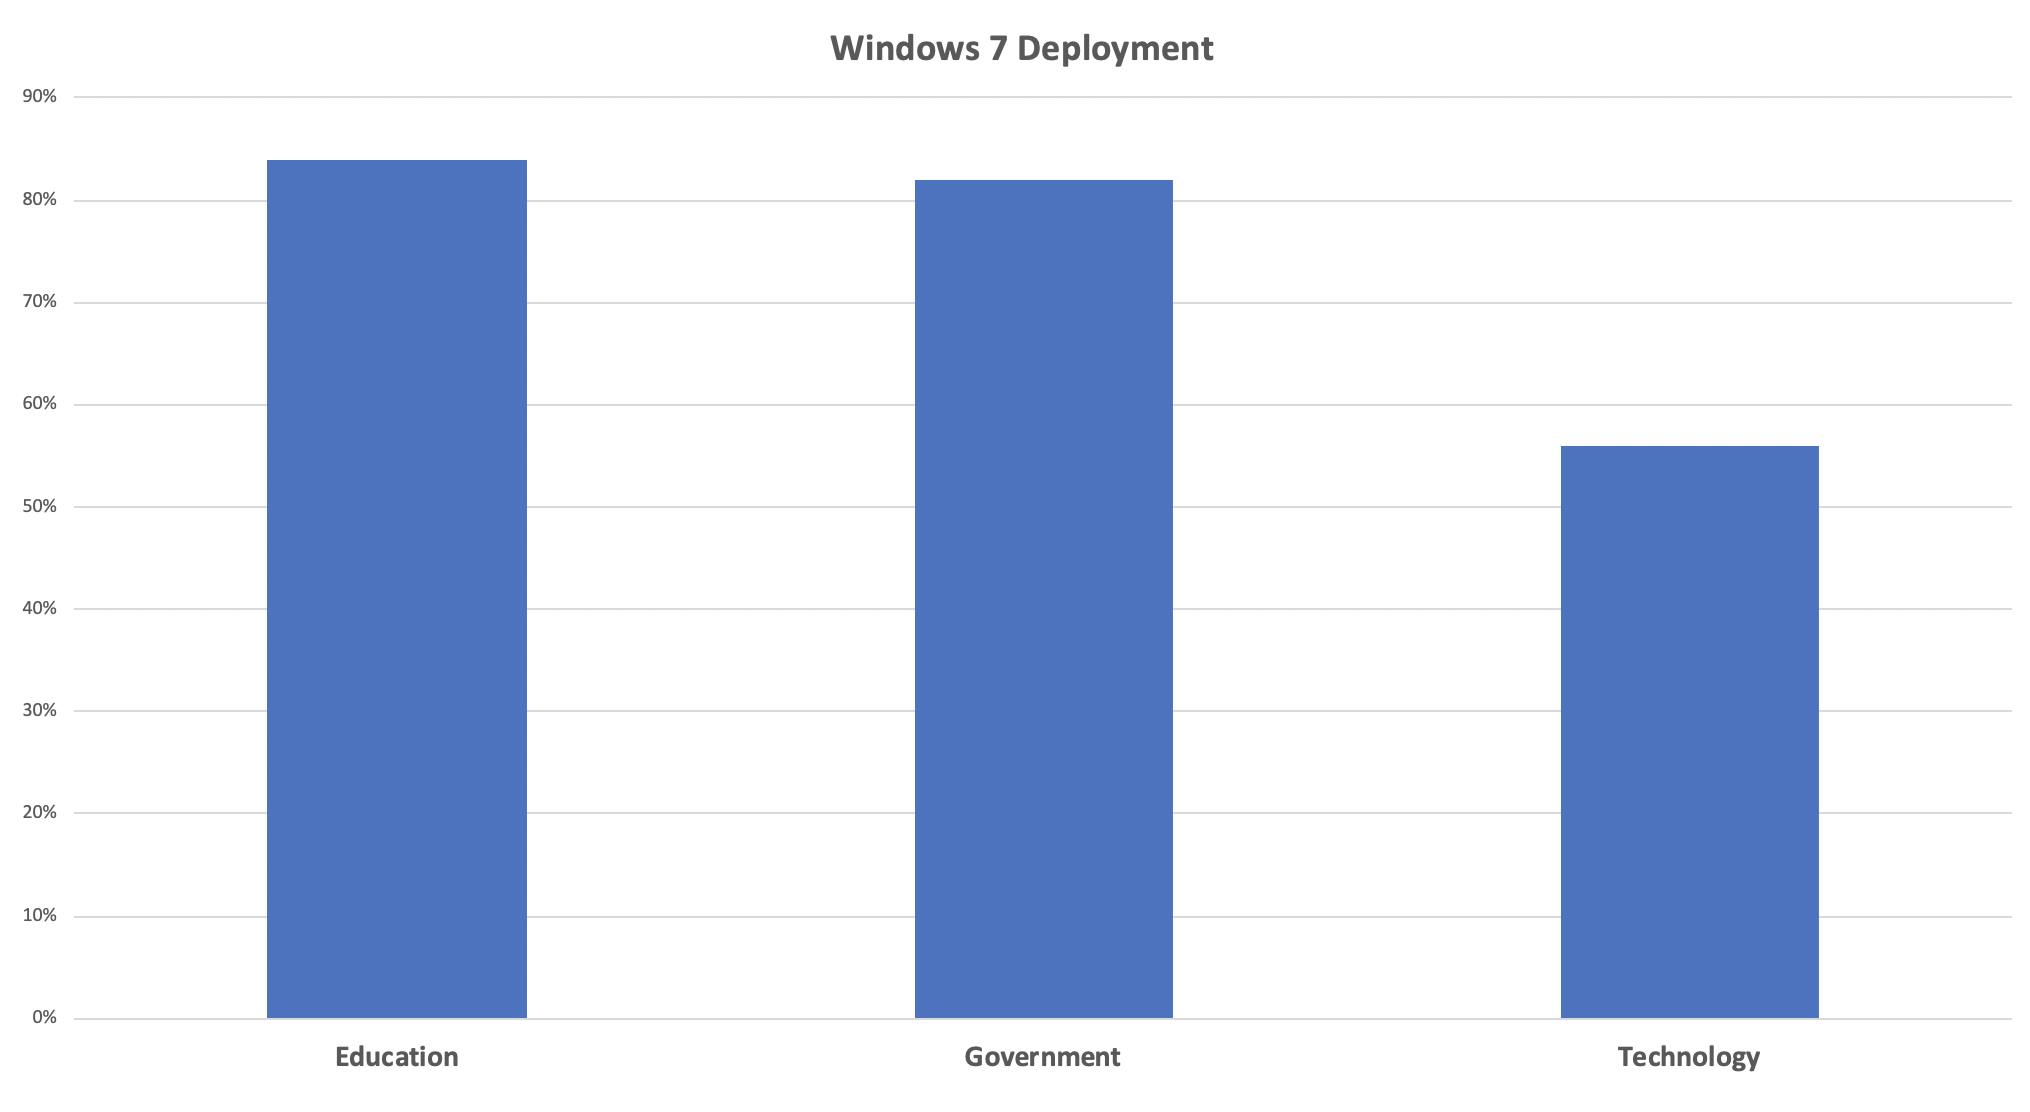 Industries with the most window's 7 computers